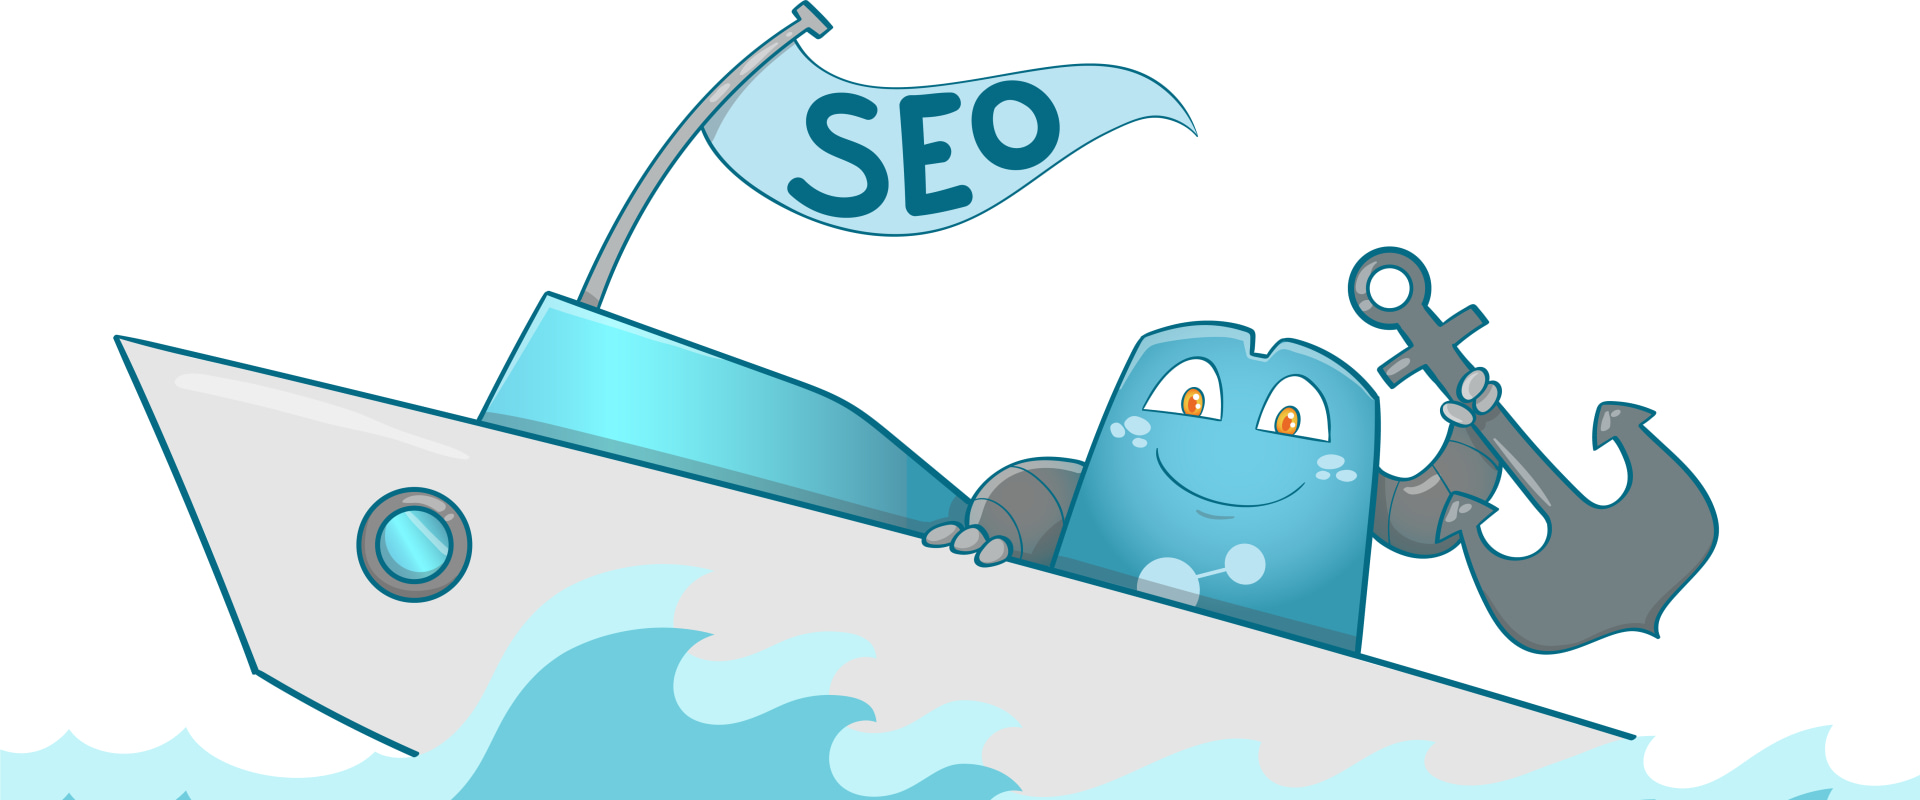 Anchor Text: The Key to Link Building